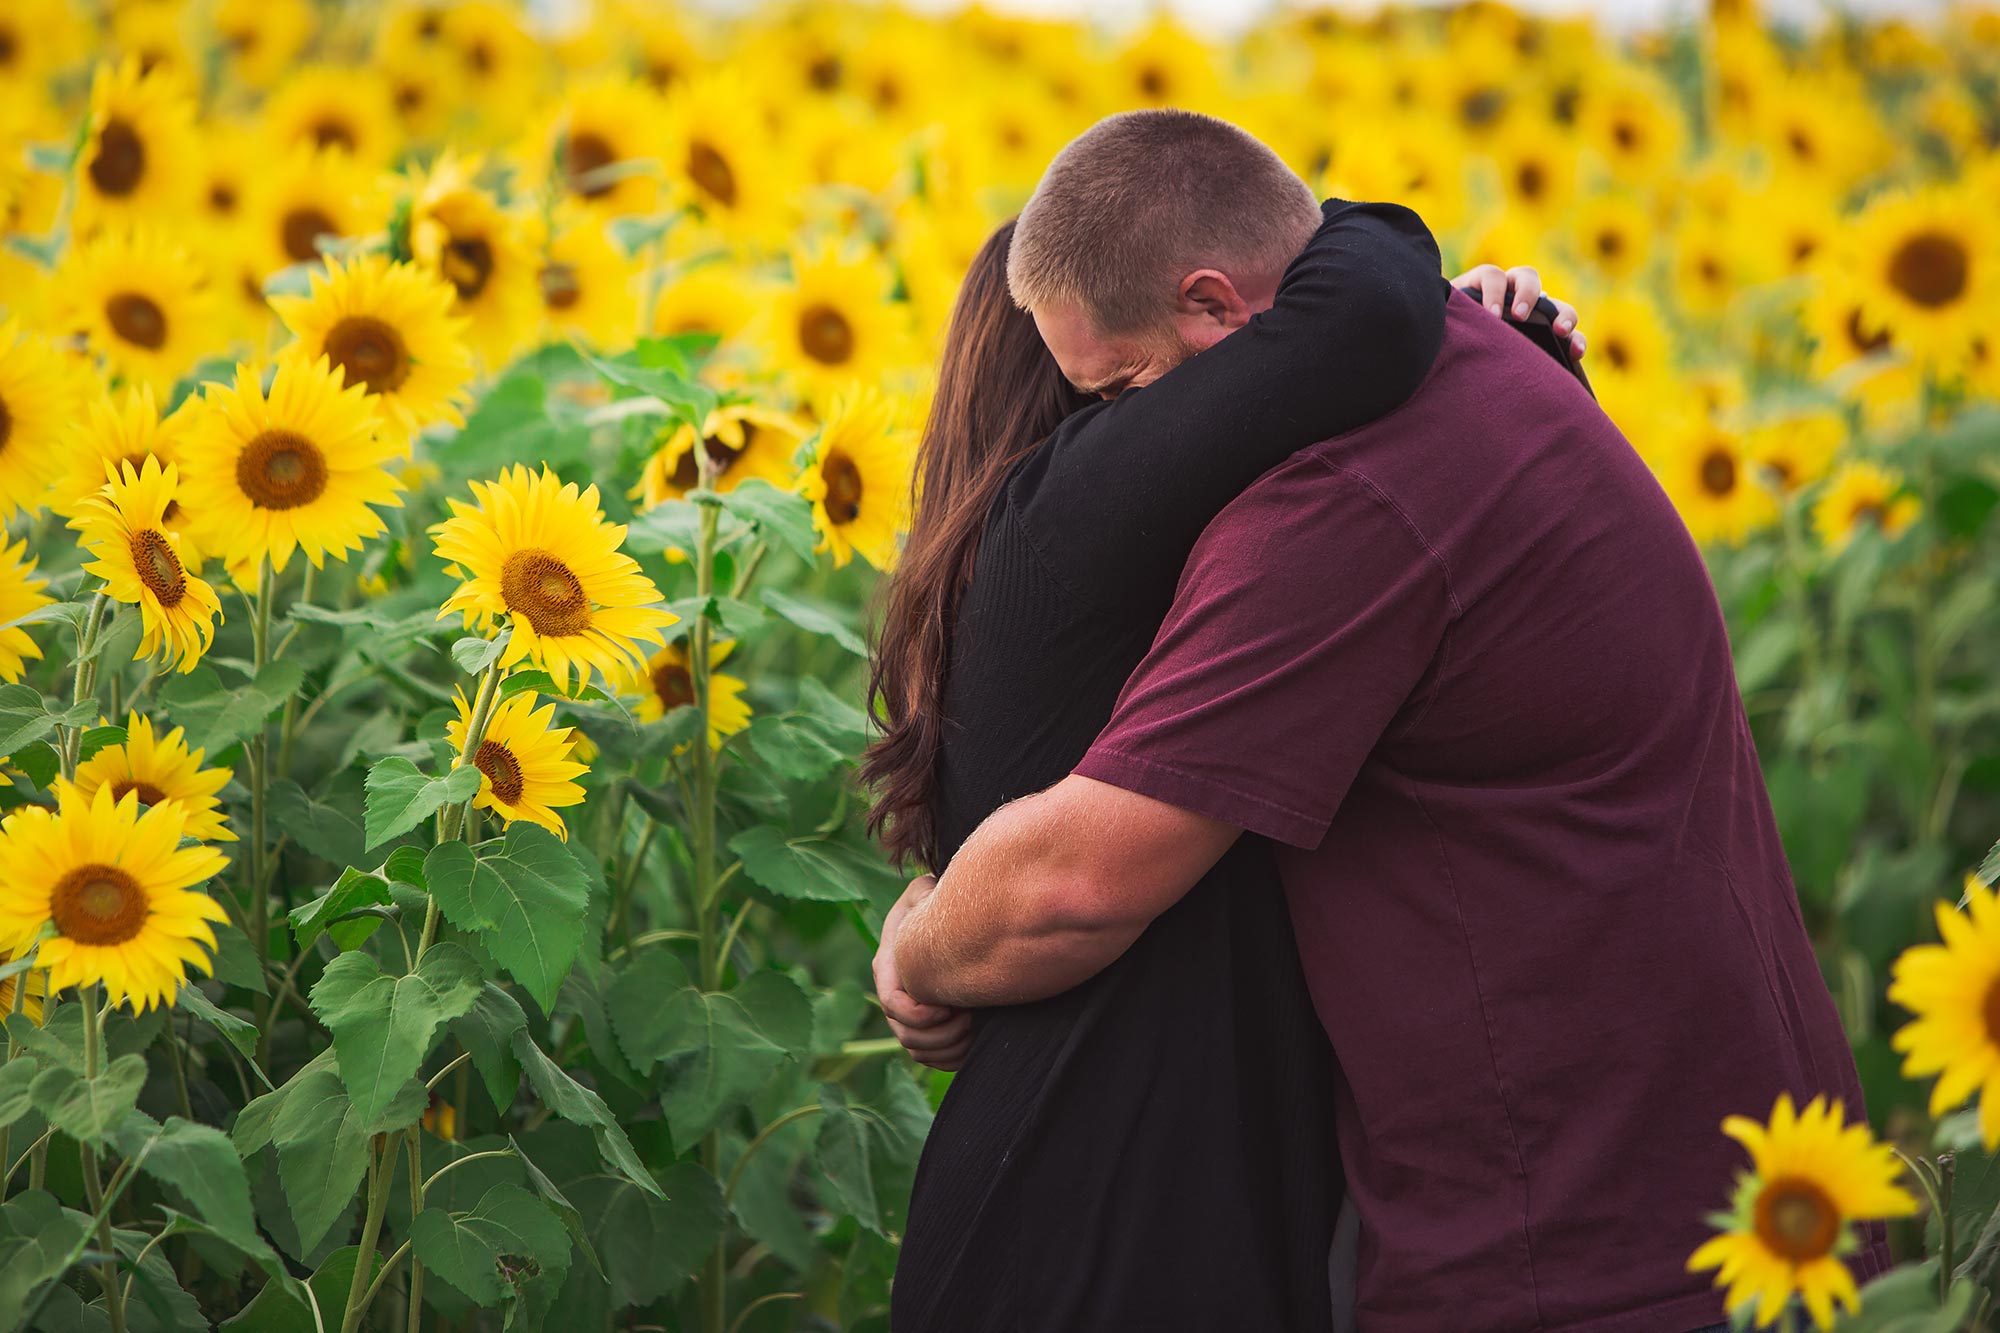 Colby Farm Sunflower Engagement Proposal | Stephen Grant Photography